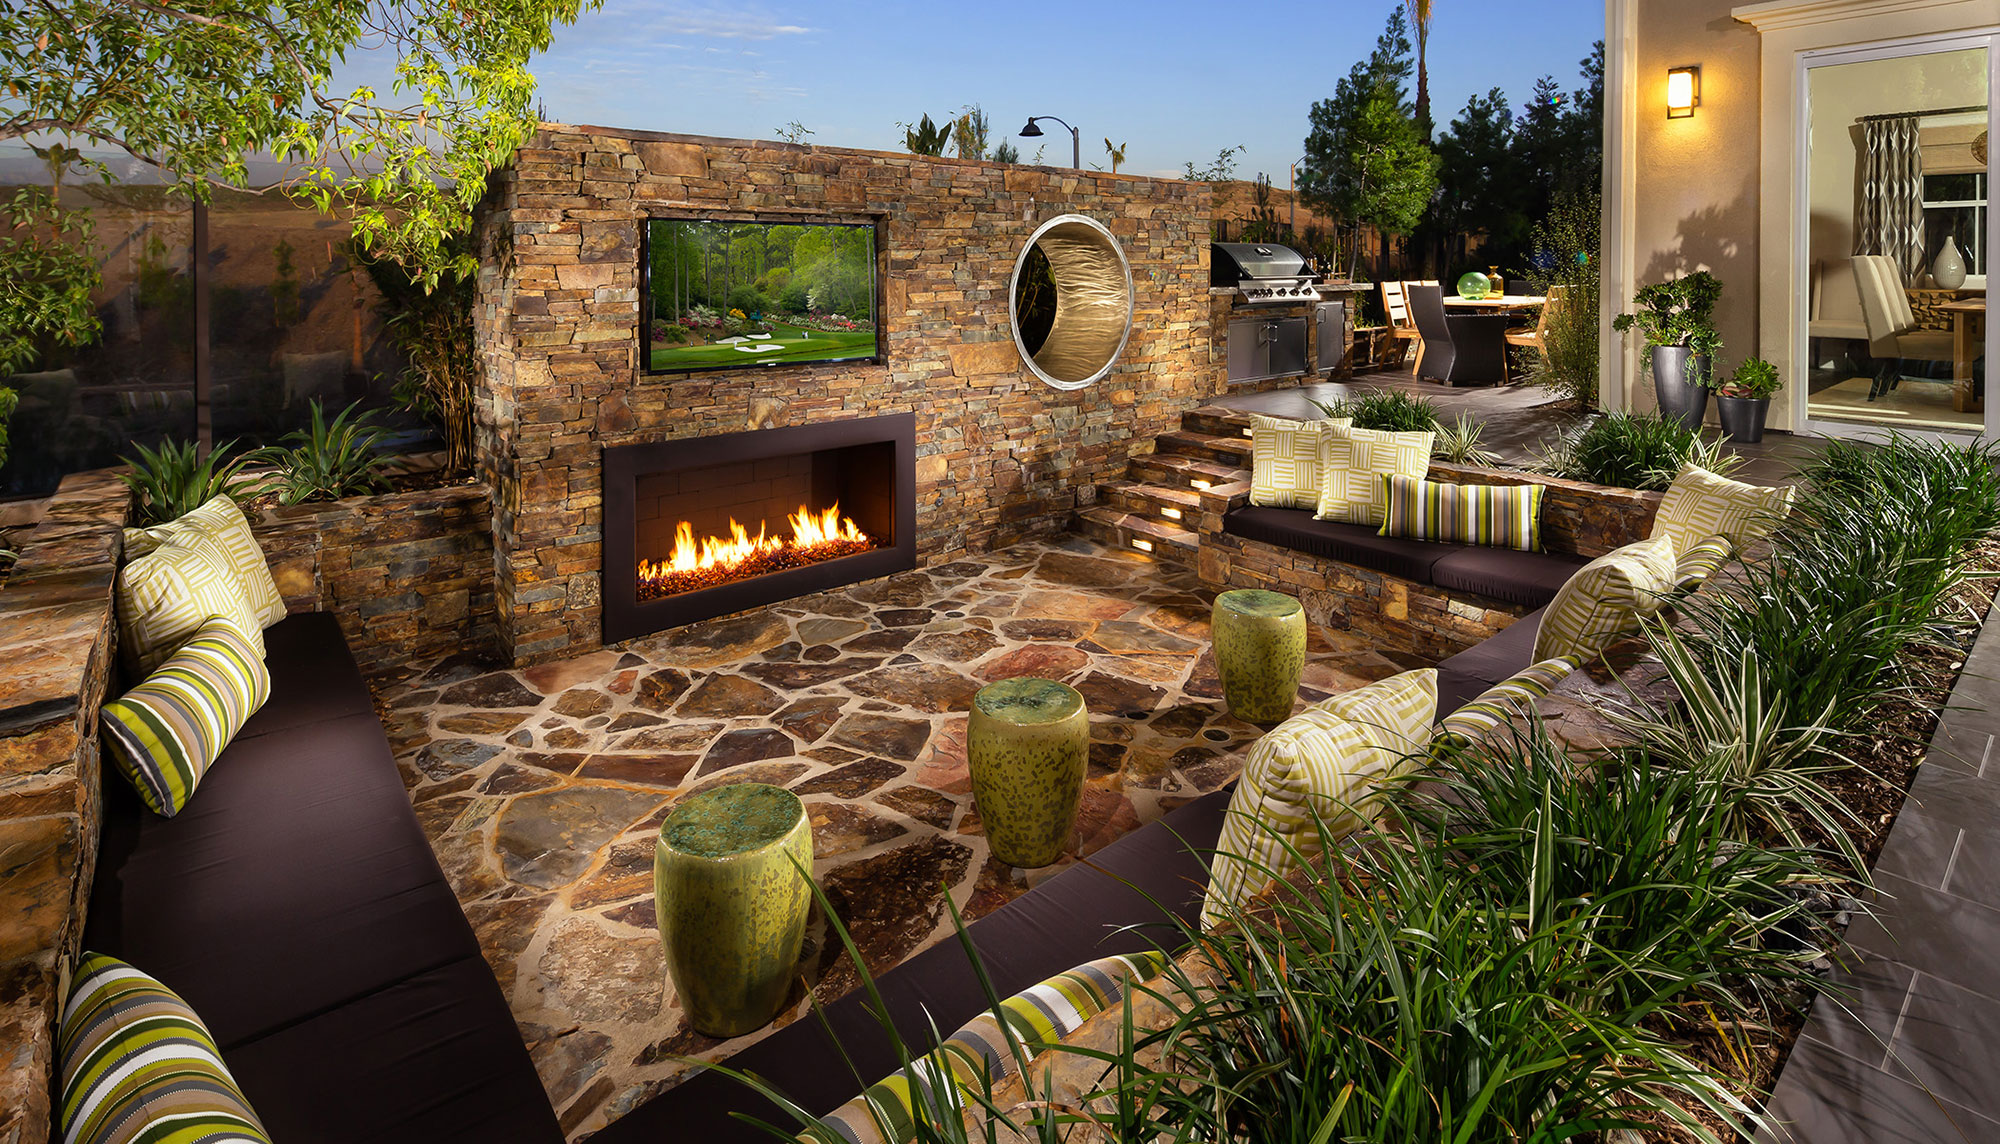 Nick Lehnert - Make the Most of Outdoor Spaces | KTGY ...